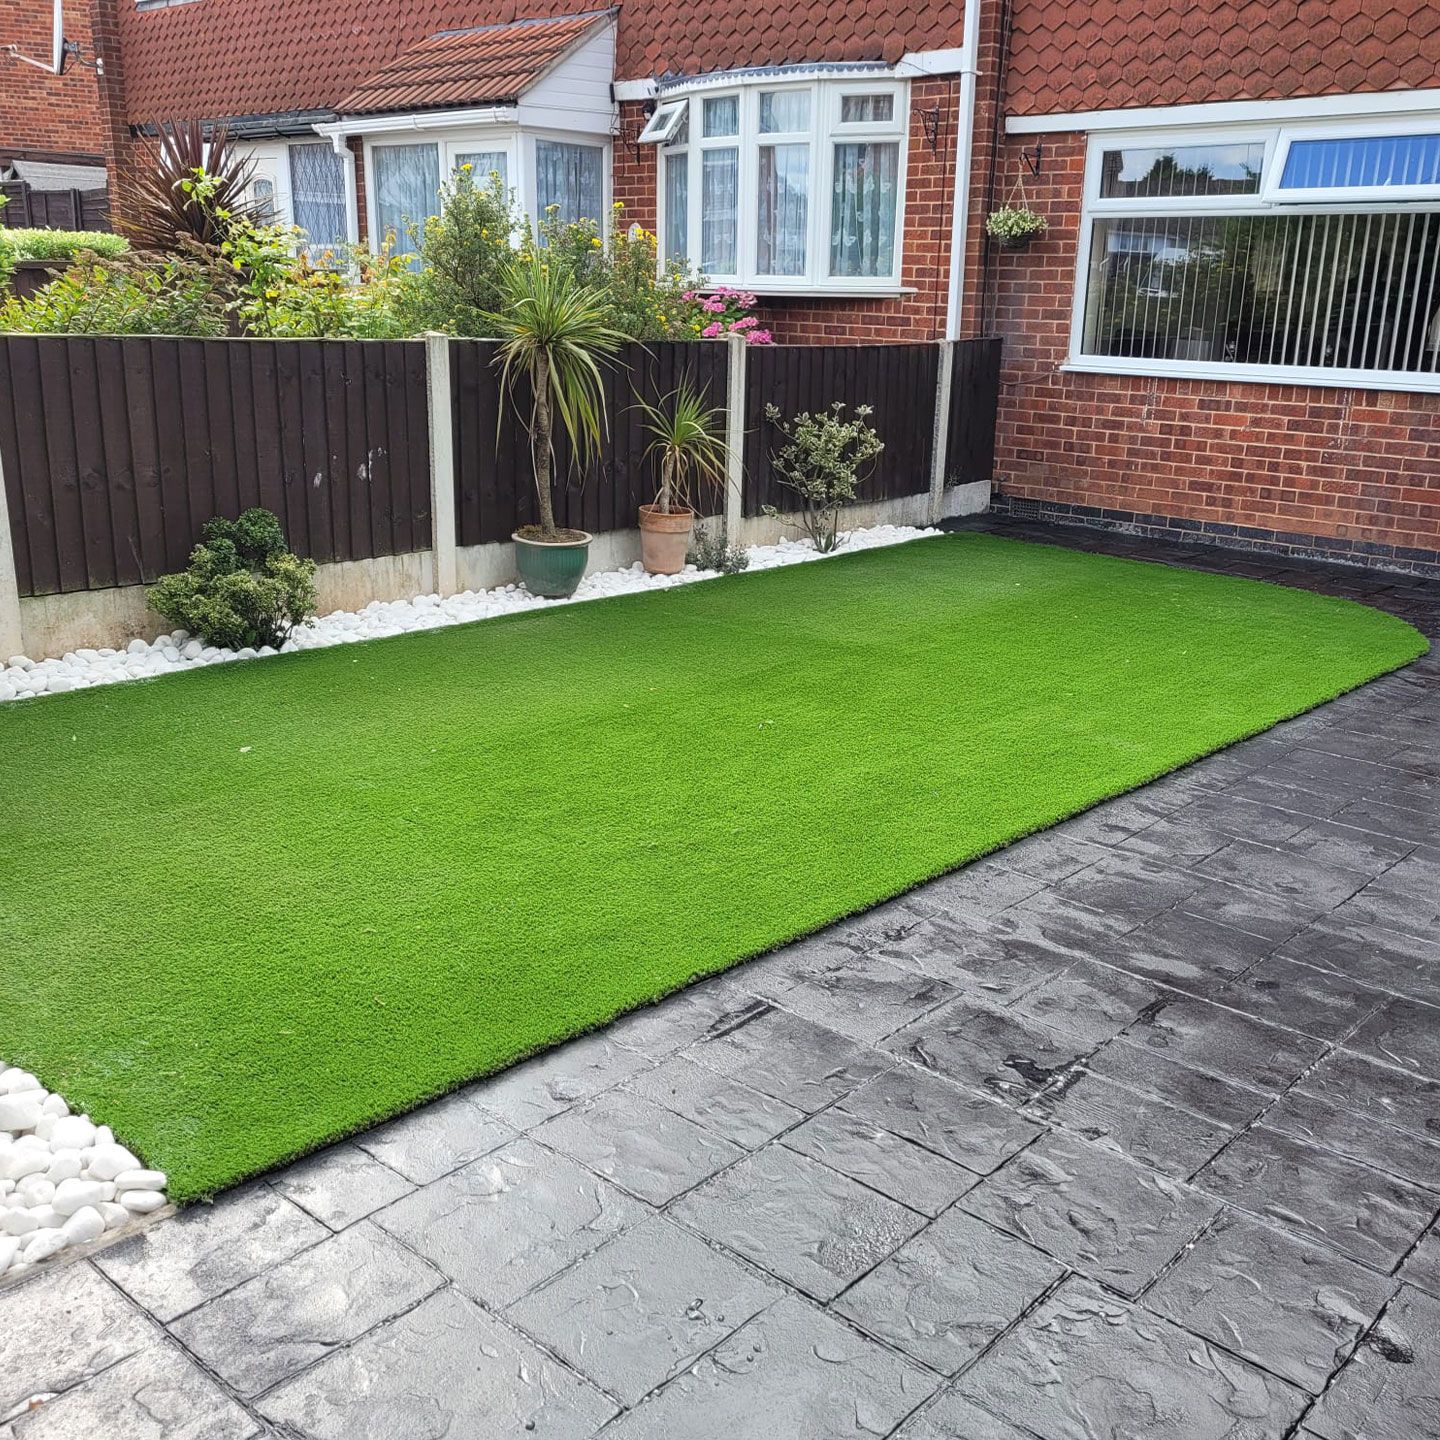 landscaping in Cawston showing new artificial grass and patterned concrete paving